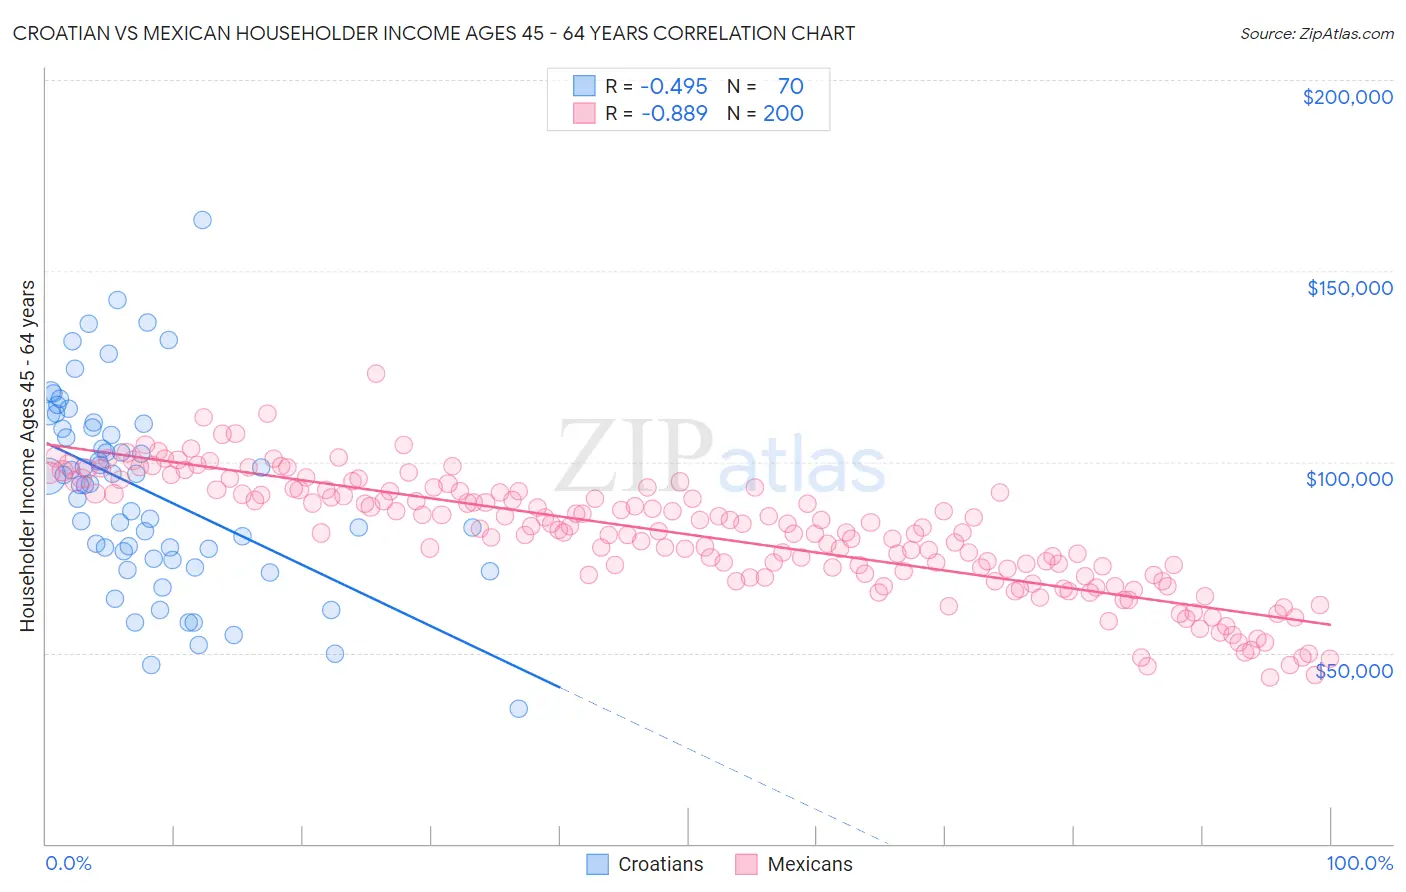 Croatian vs Mexican Householder Income Ages 45 - 64 years